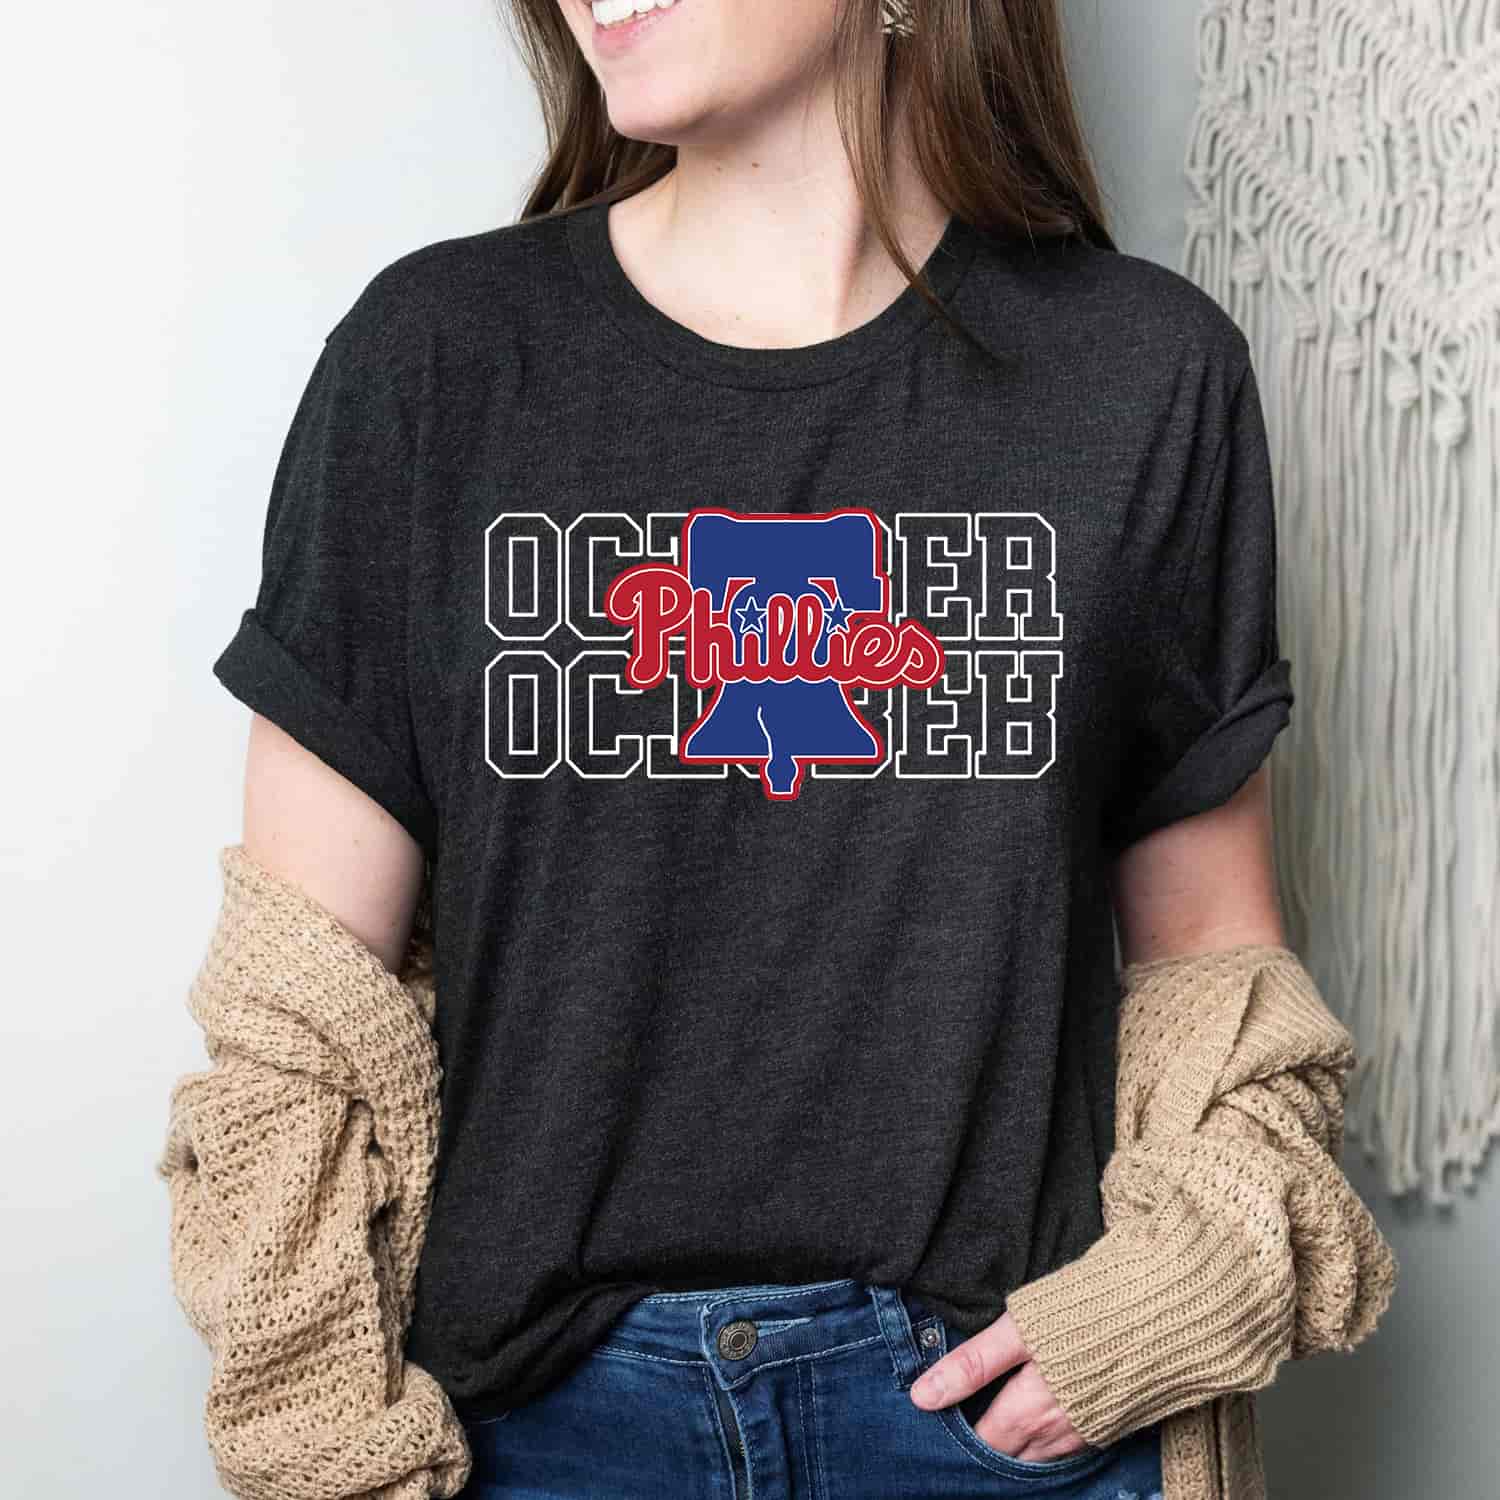 Red October Phillies Shirt, Cool phillies Shirts, Gifts for